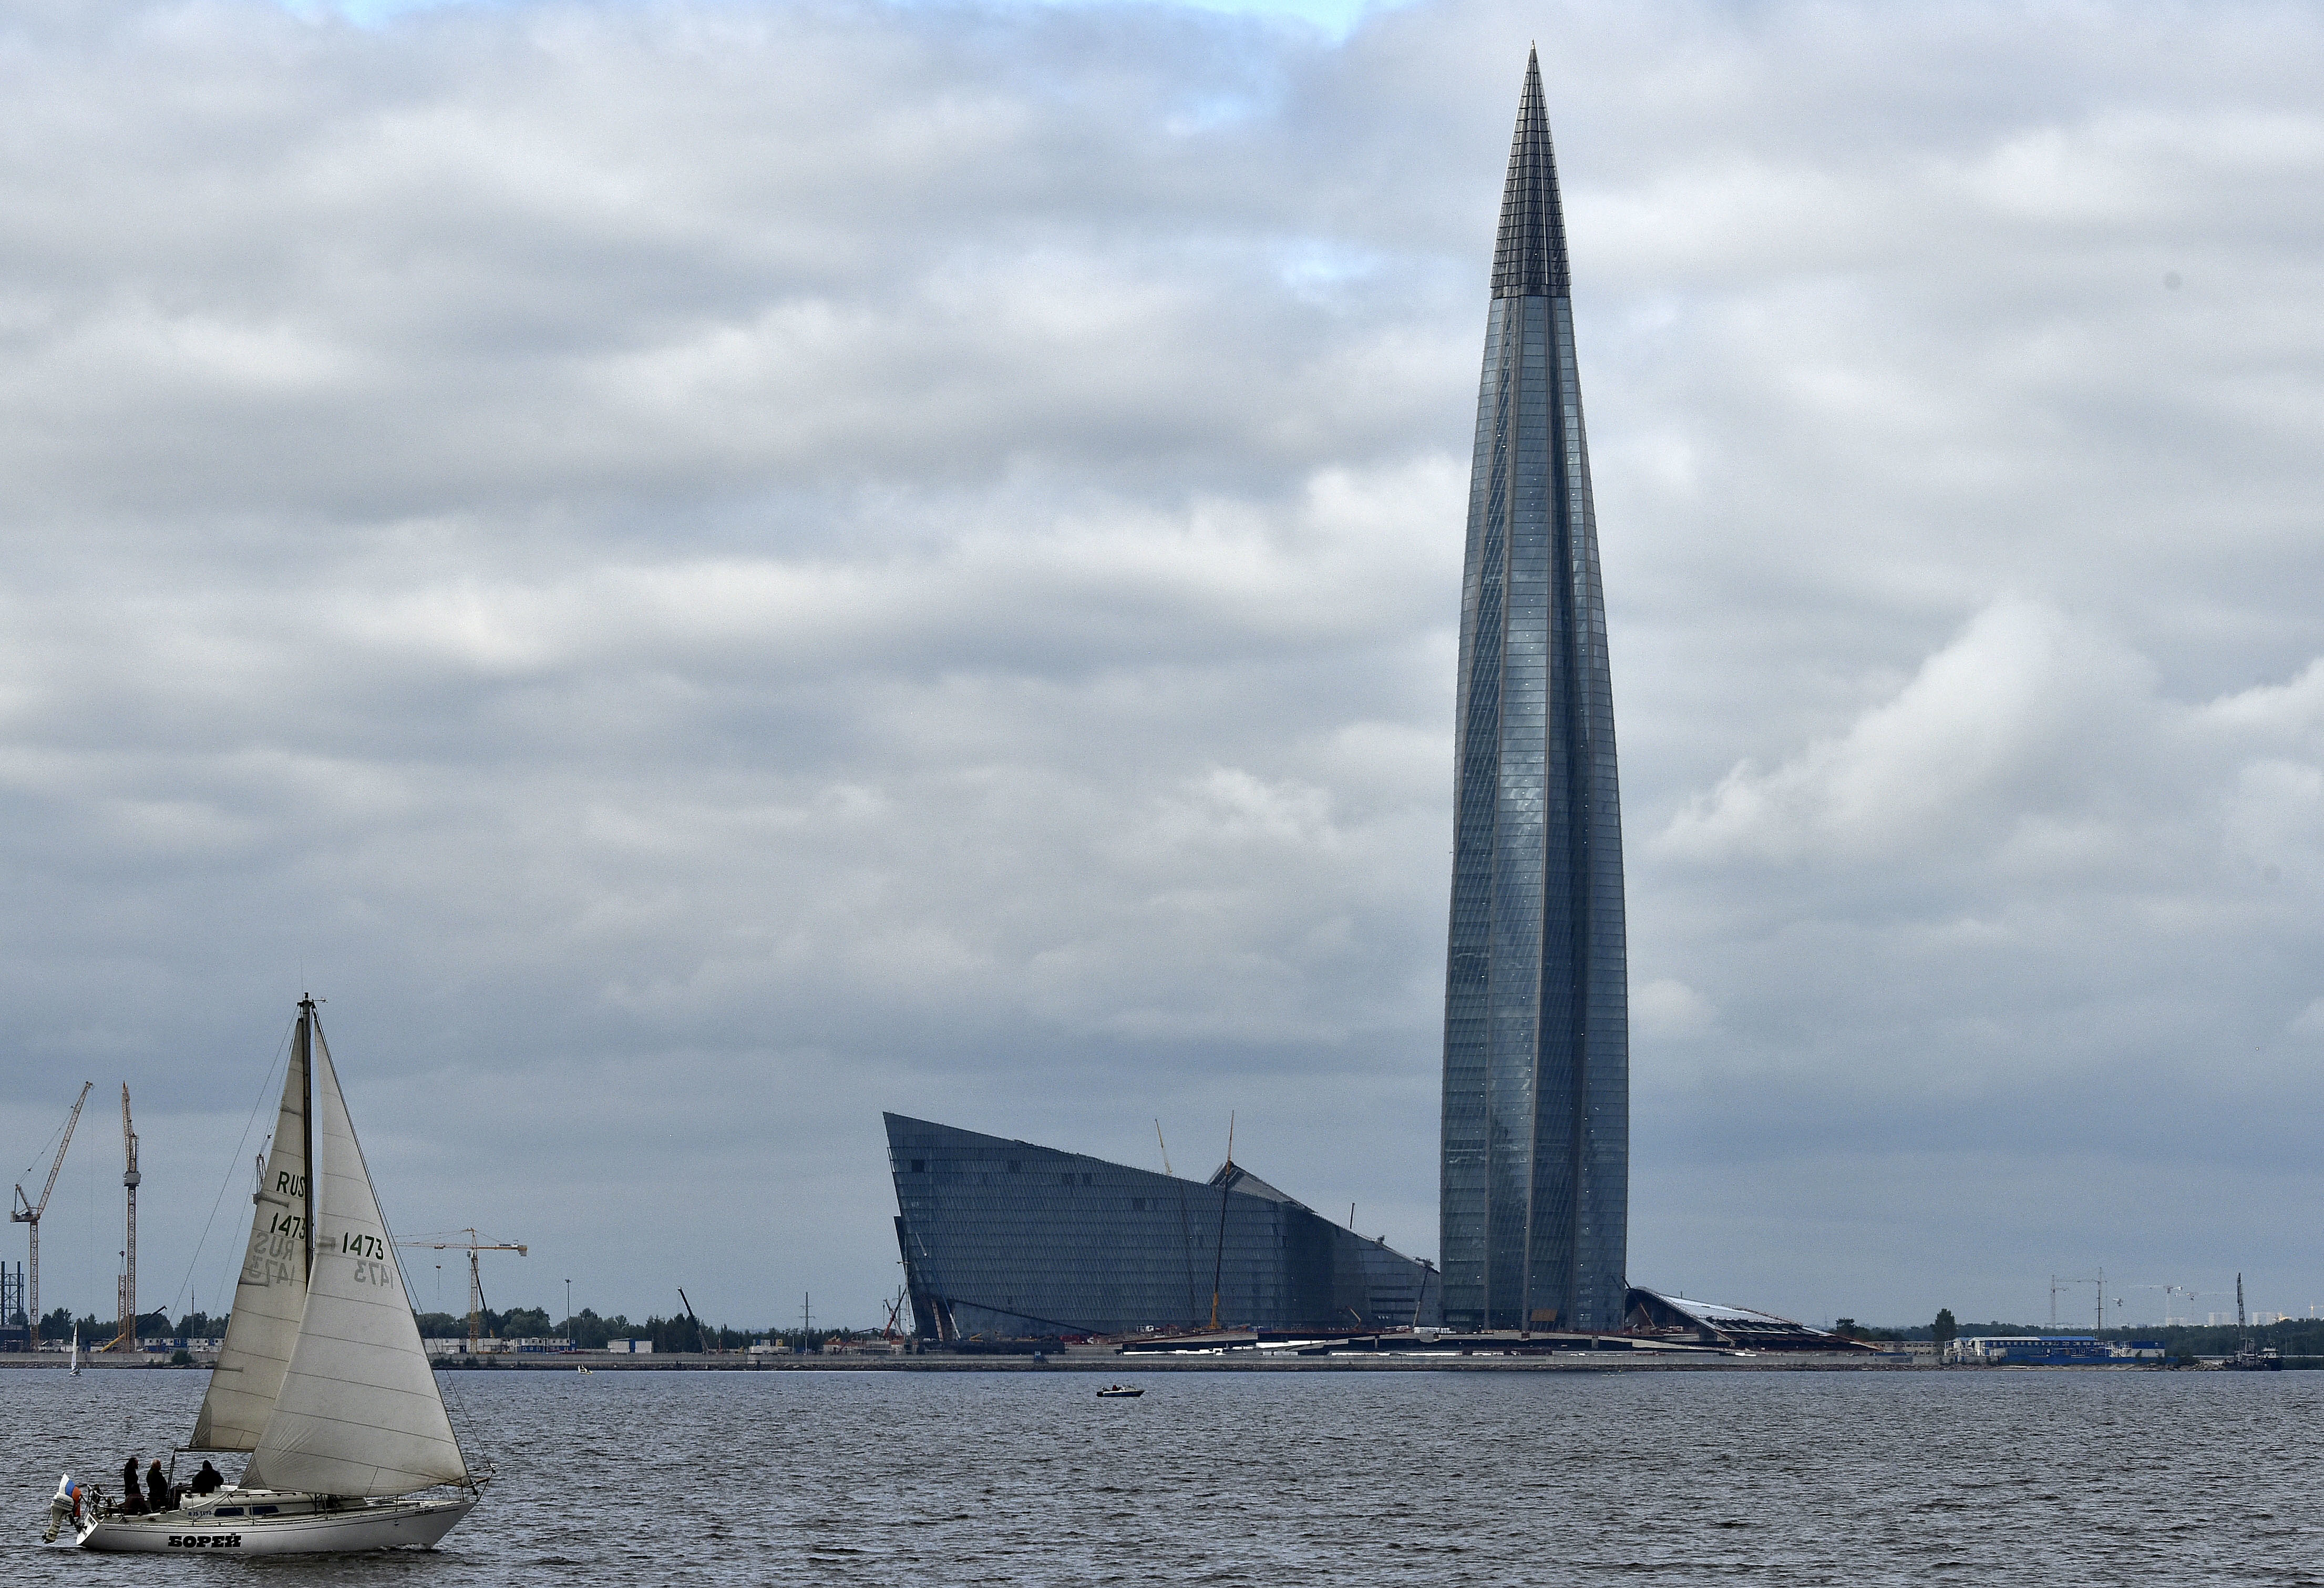 A sailboat passes the new Lakhta Center during the 2018 soccer World Cup in St. Petersburg, Russia, Sunday, July 8, 2018. The new headquarter of Russian energy company Gazprom is with 462 meters the tallest building in Europe. France will meet Belgium in the semifinal of the World Cup on Tuesday at the St. Petersburg Stadium. (AP Photo/Martin Meissner)